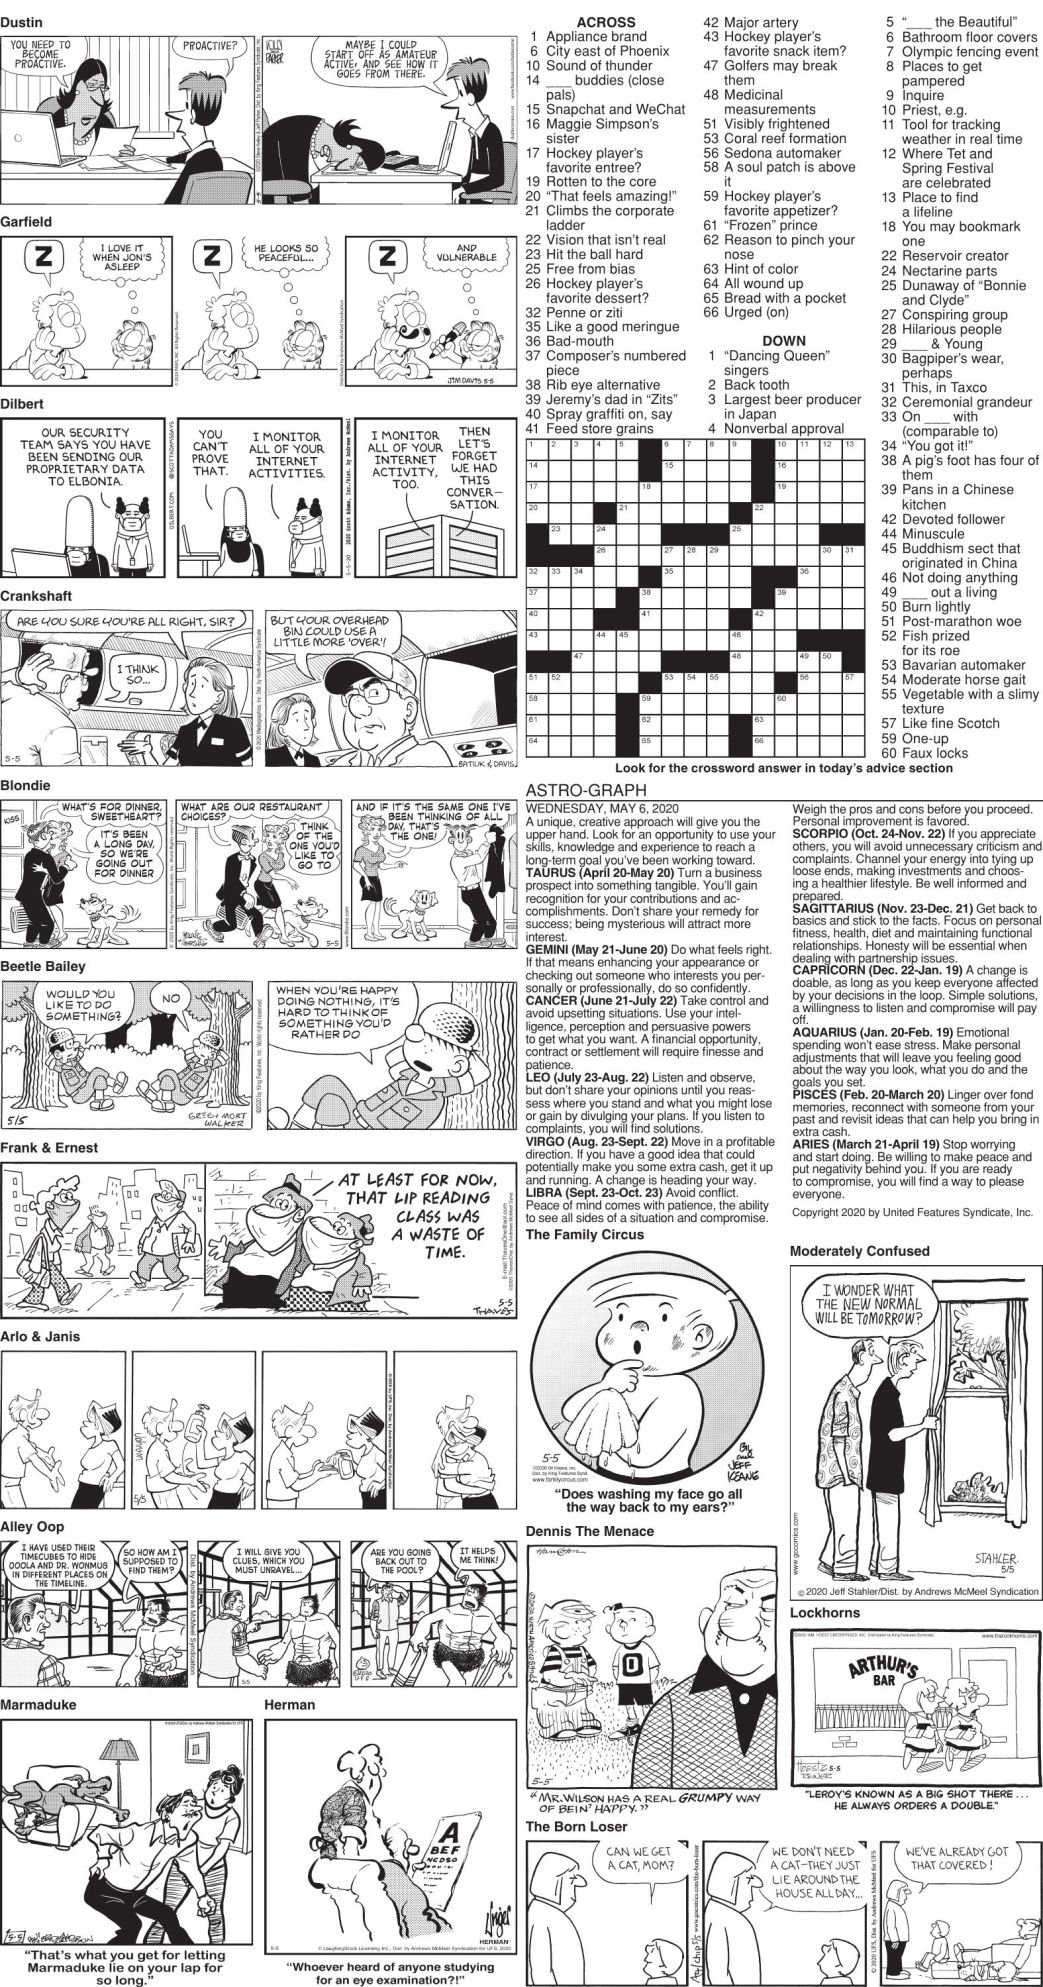 Comics and crossword page for Tuesday May 5 2020 News goshennews com